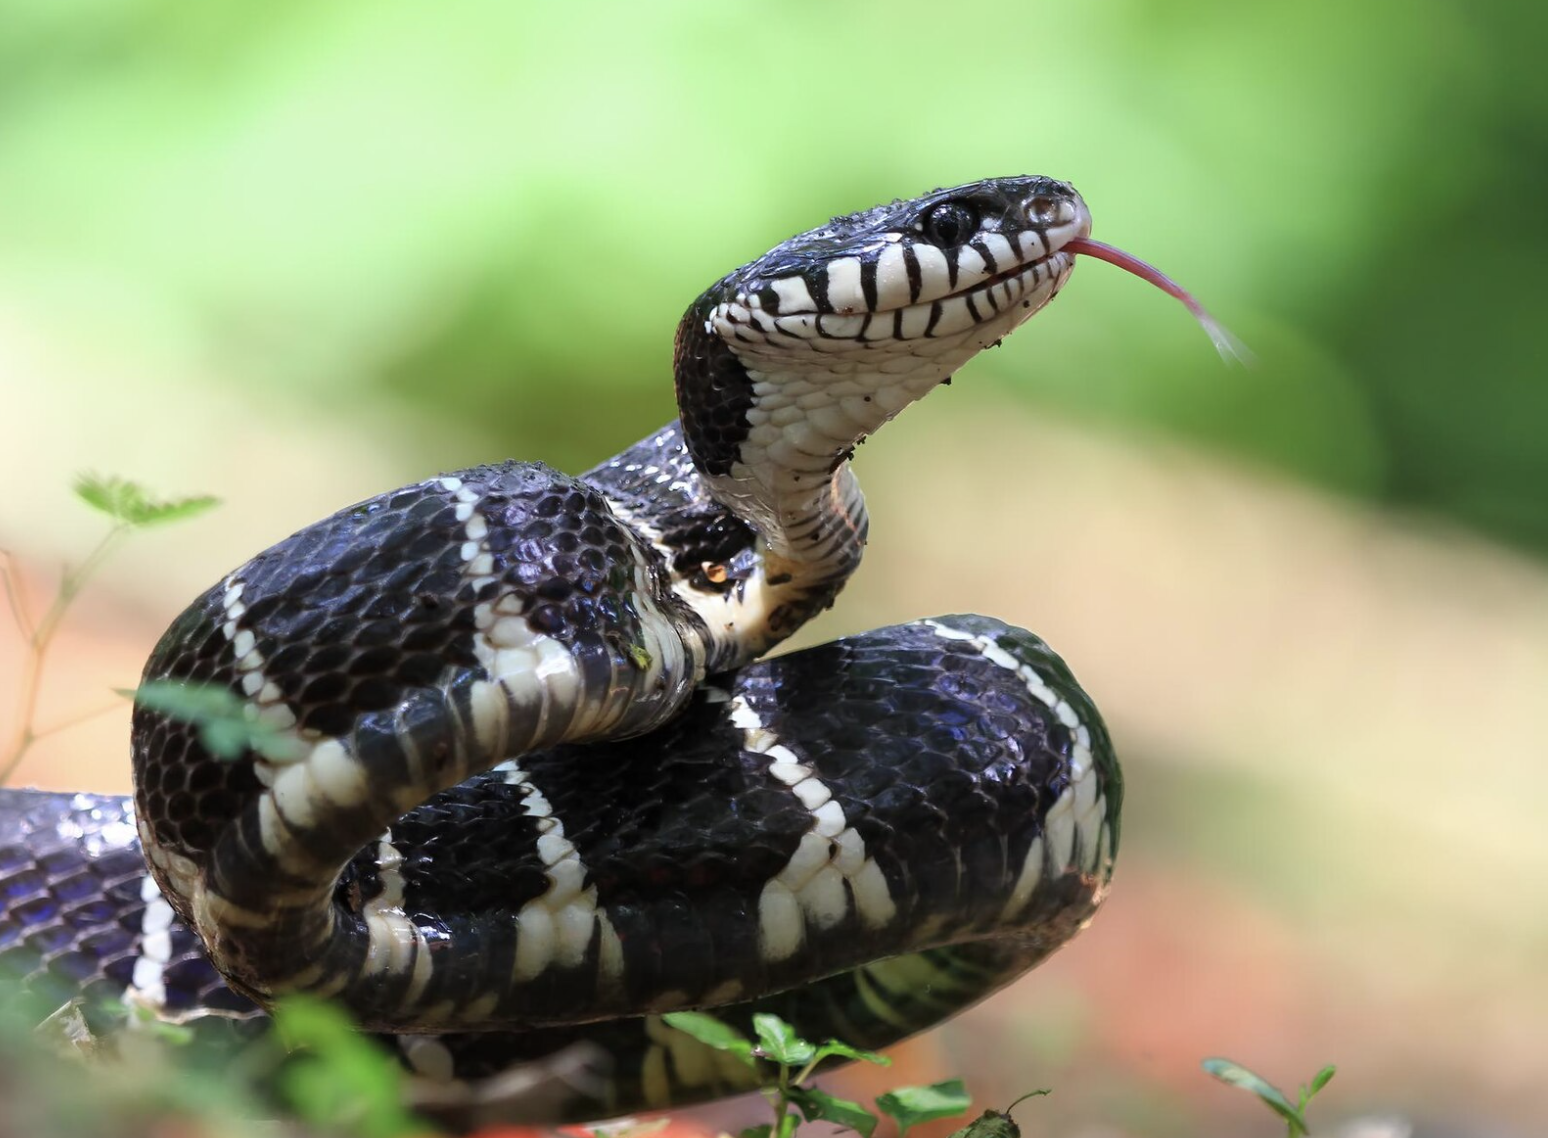 7 Of The Deadliest Snakes In The World